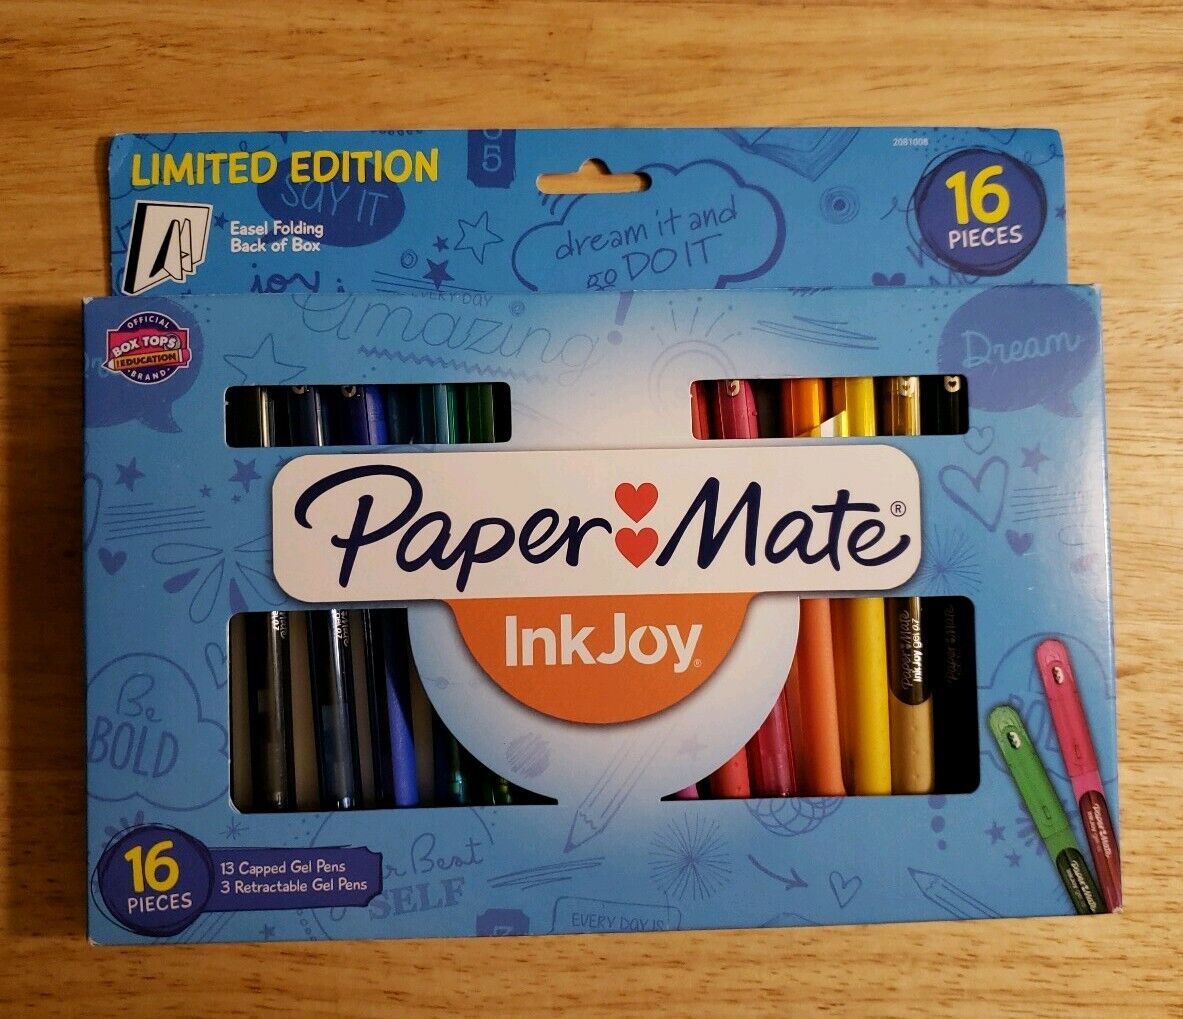 PAPER MATE INK JOY 16 GEL PENS LIMITED EDITION Capped & RT 16 Count. New